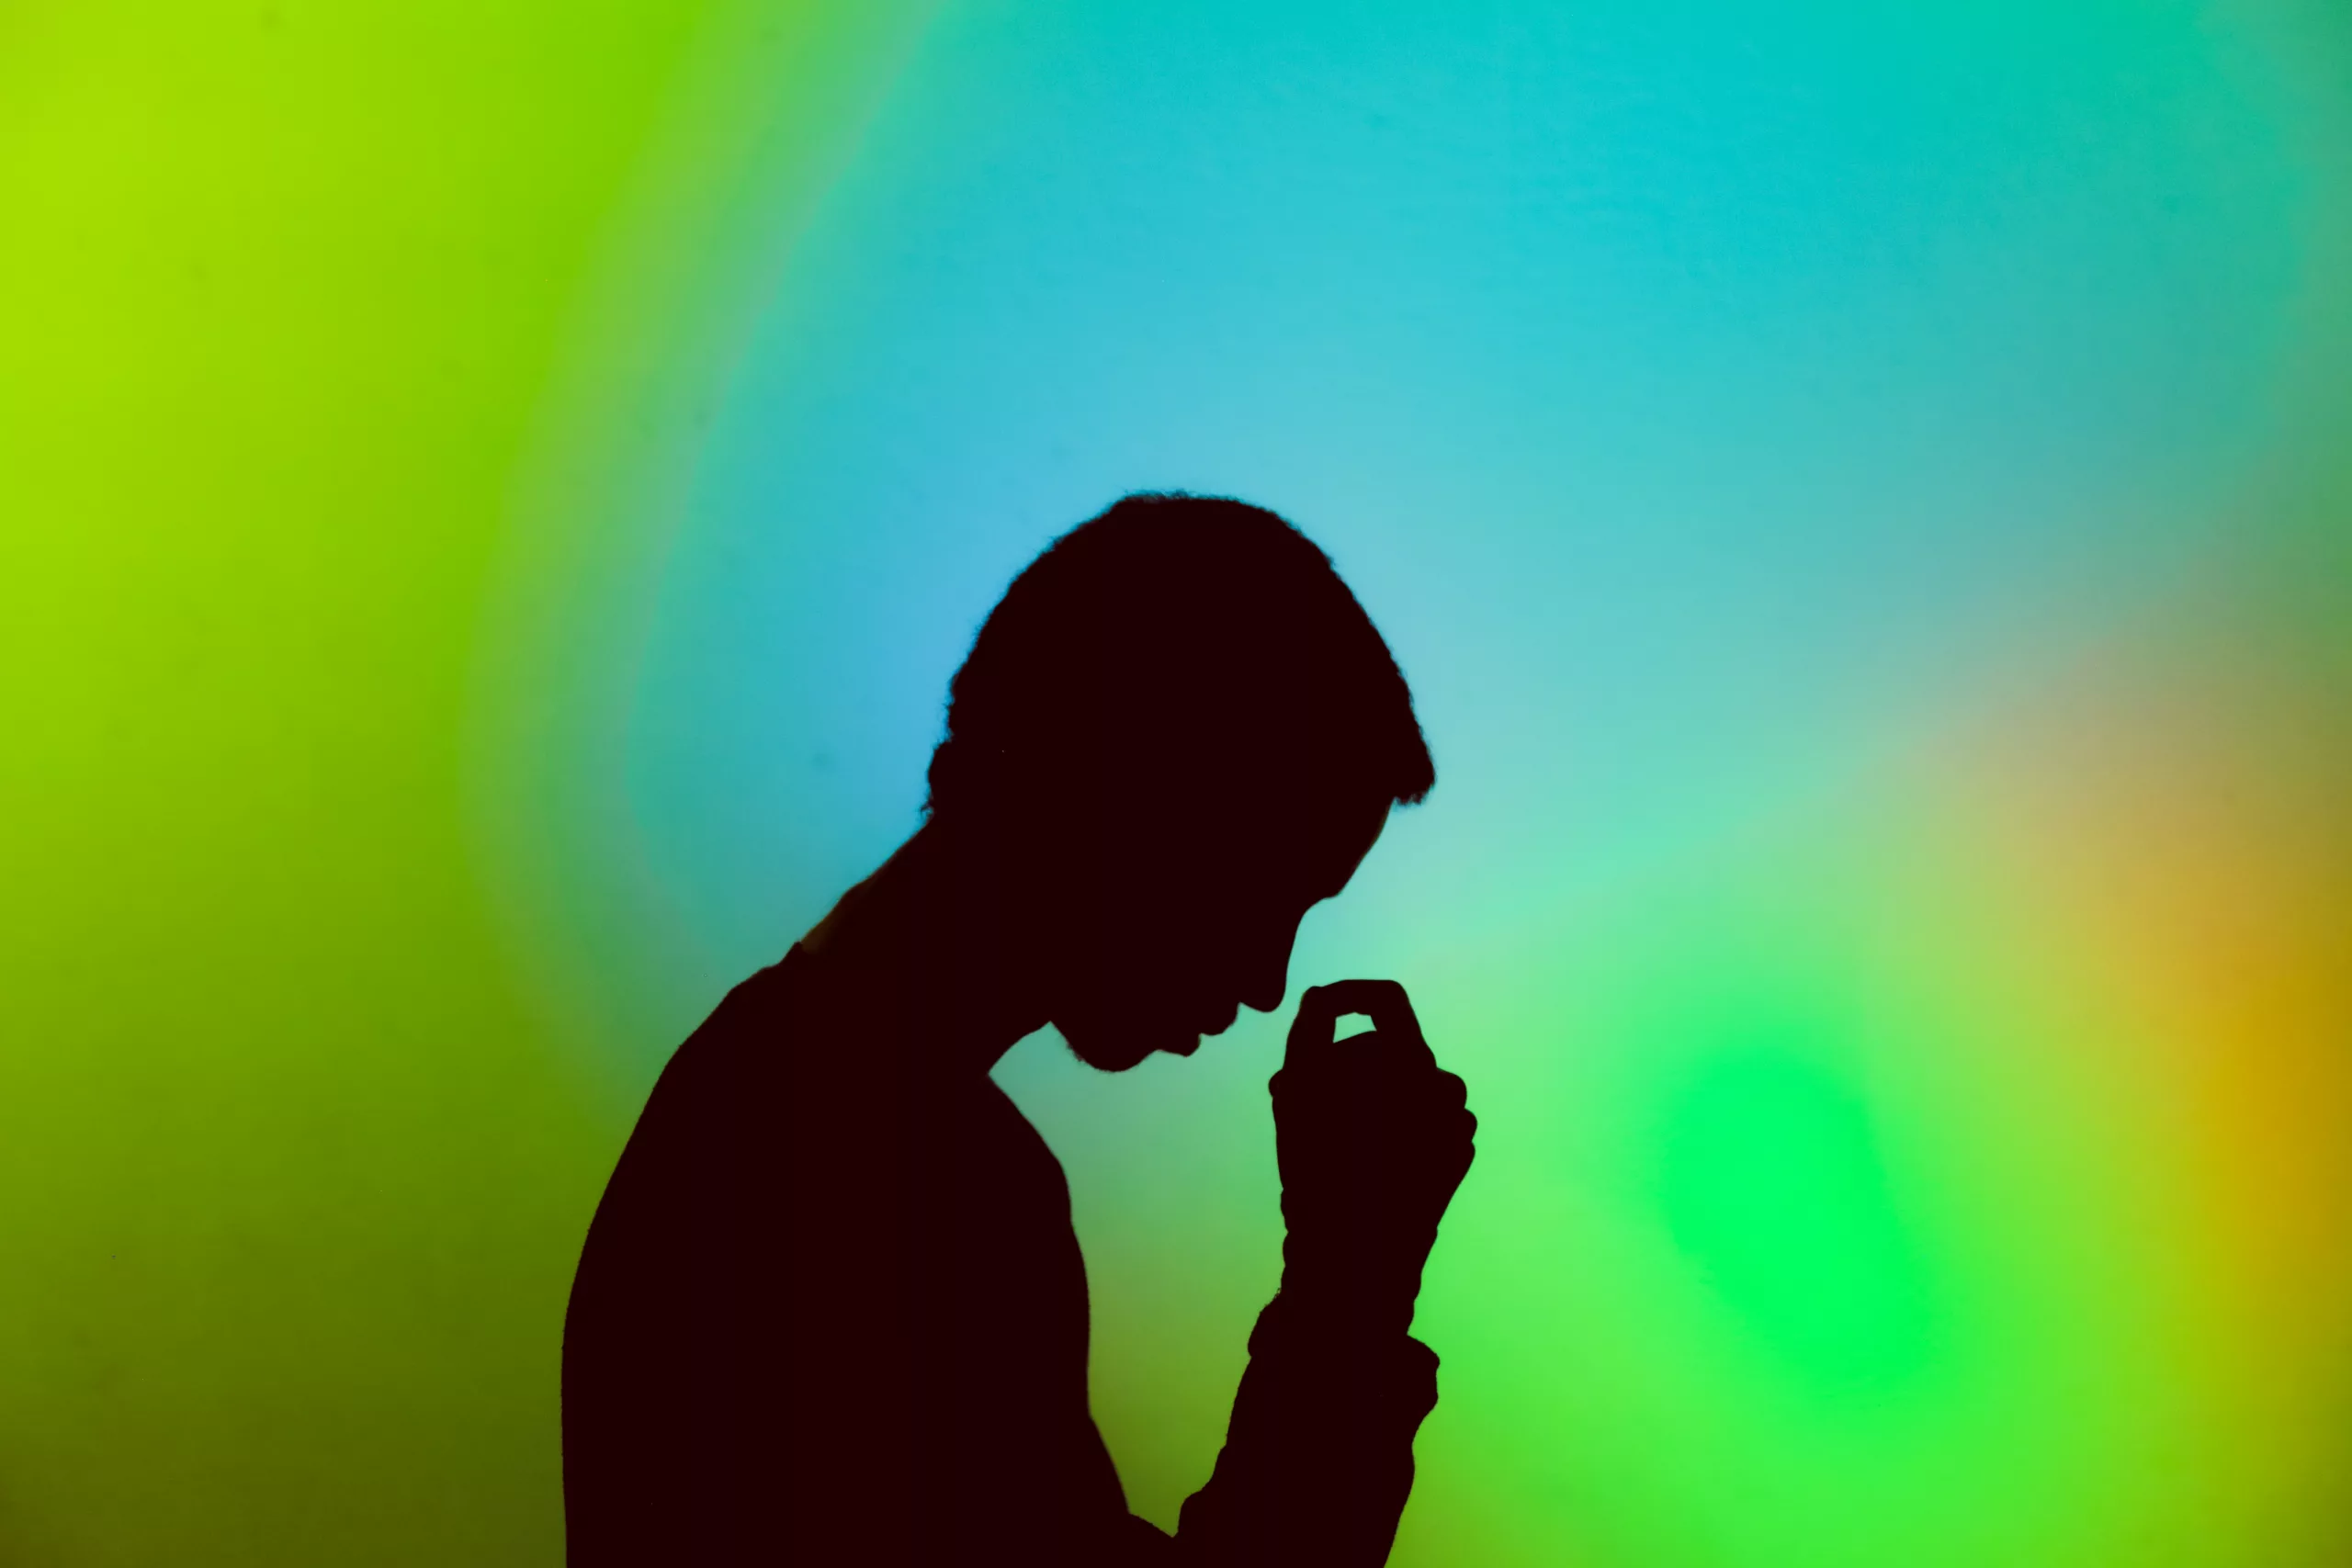 A man in thought against a multi-coloured background